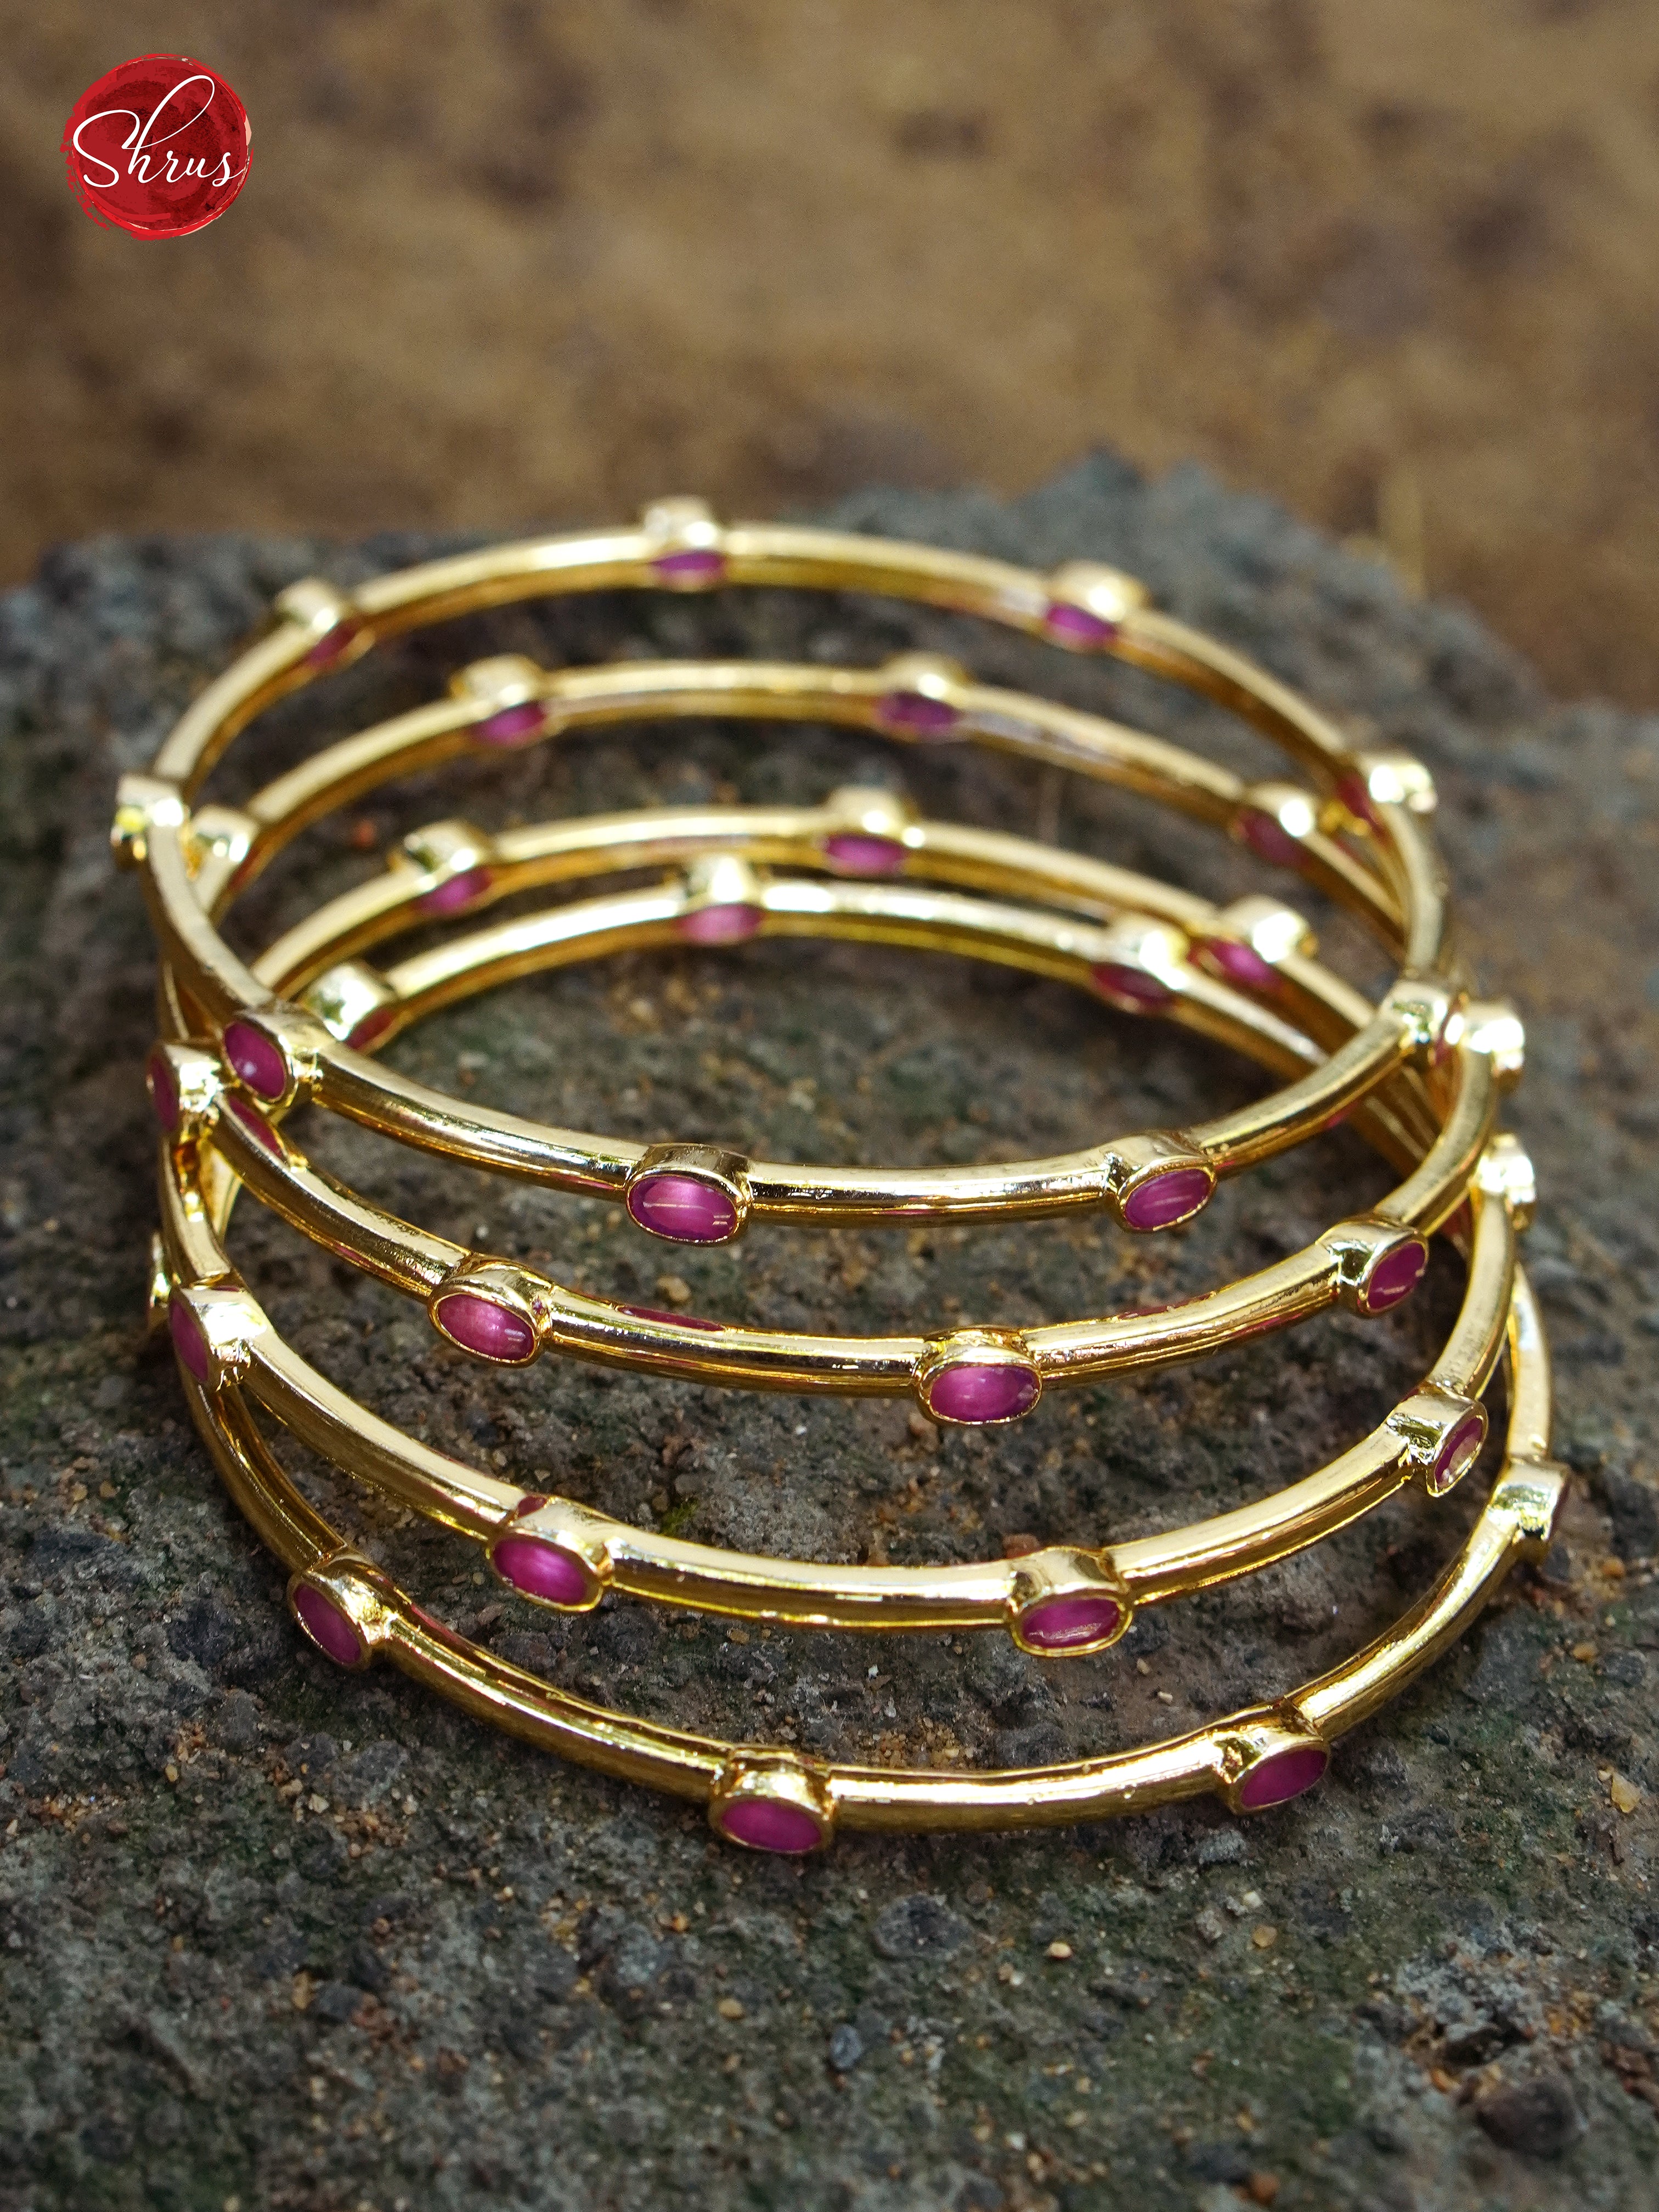 REd stone Bangles - Accessories